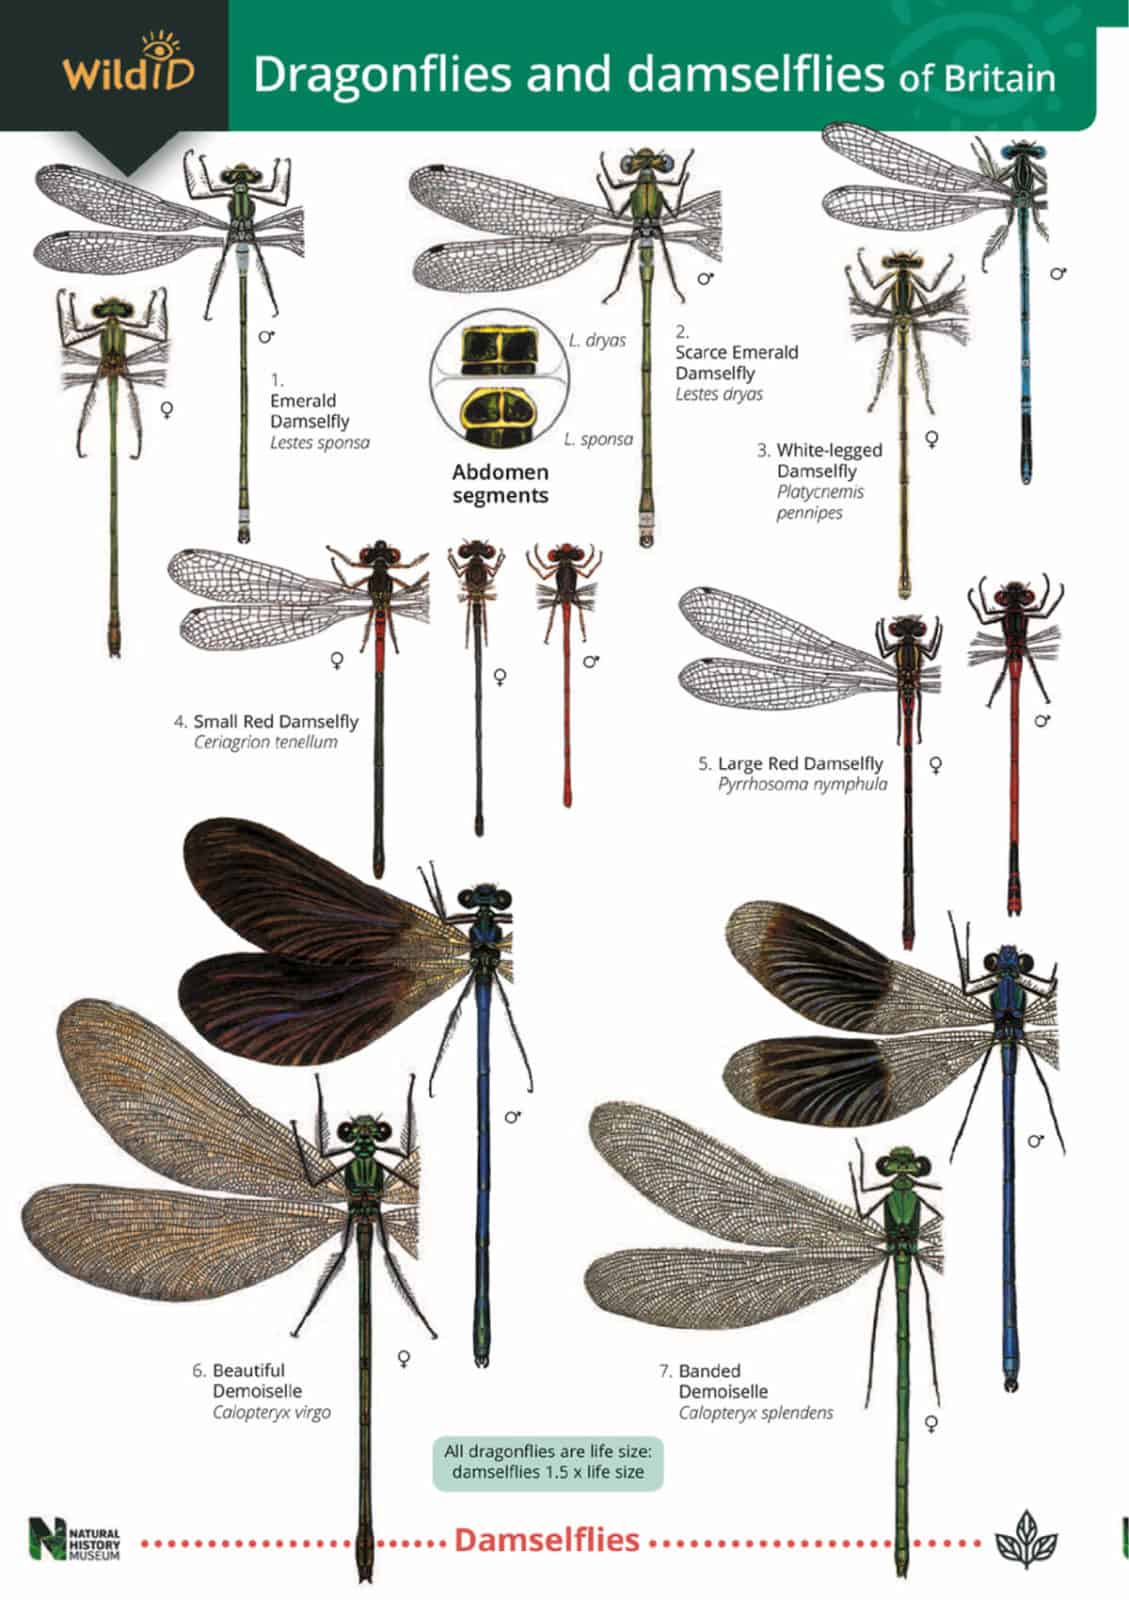 dragonflies guide